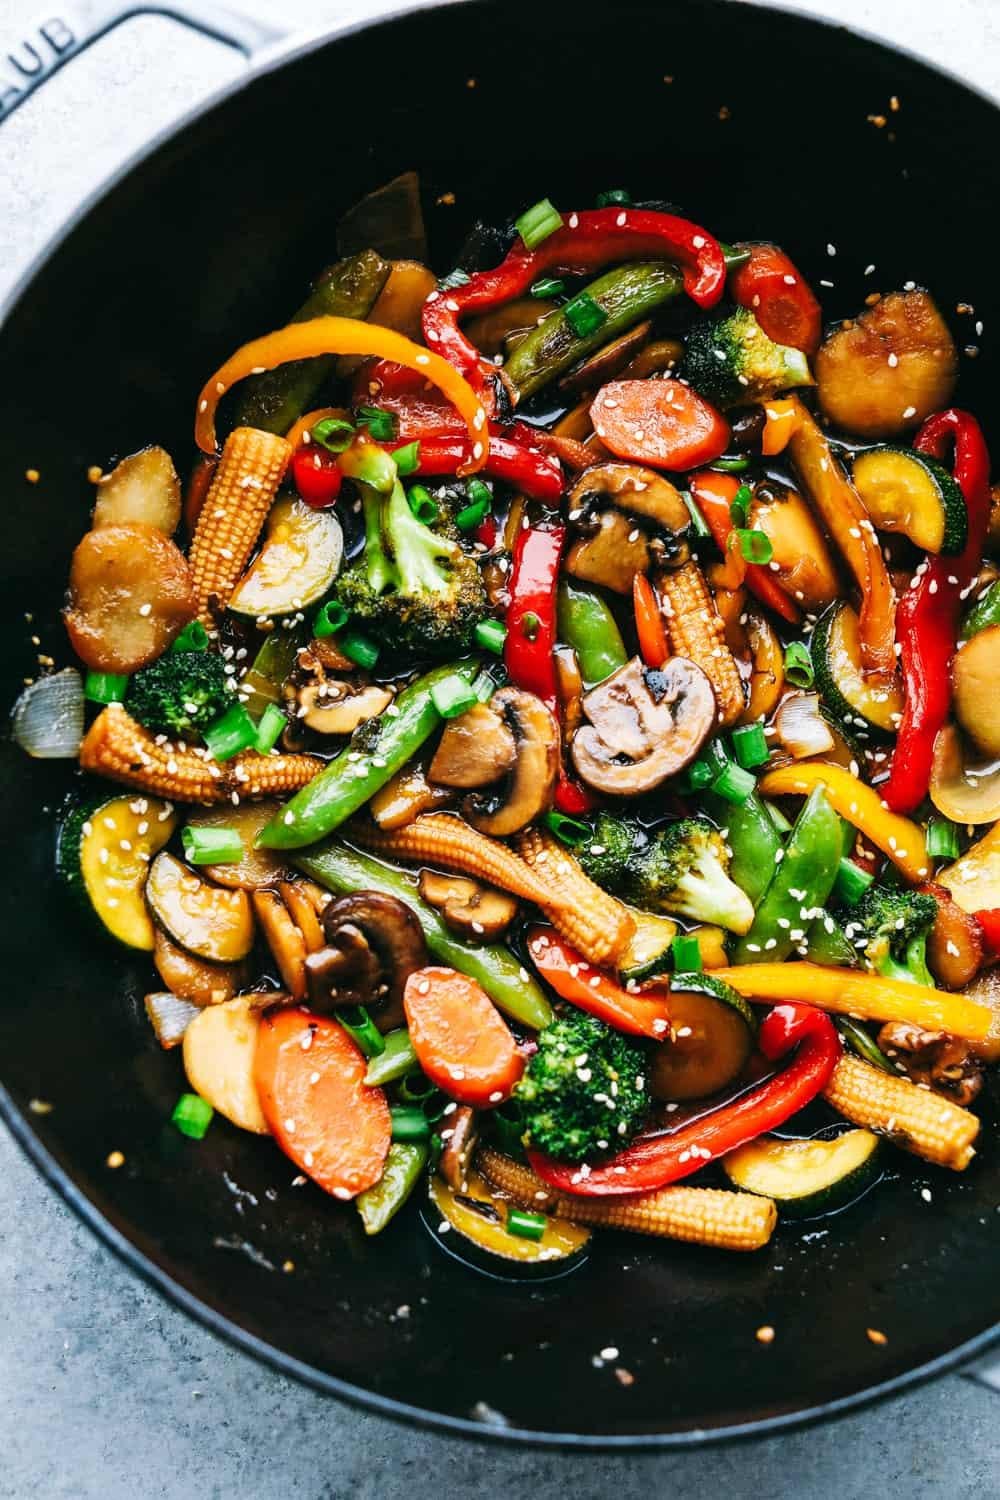 10-Minute Easy and Healthy Stir Fry Recipe